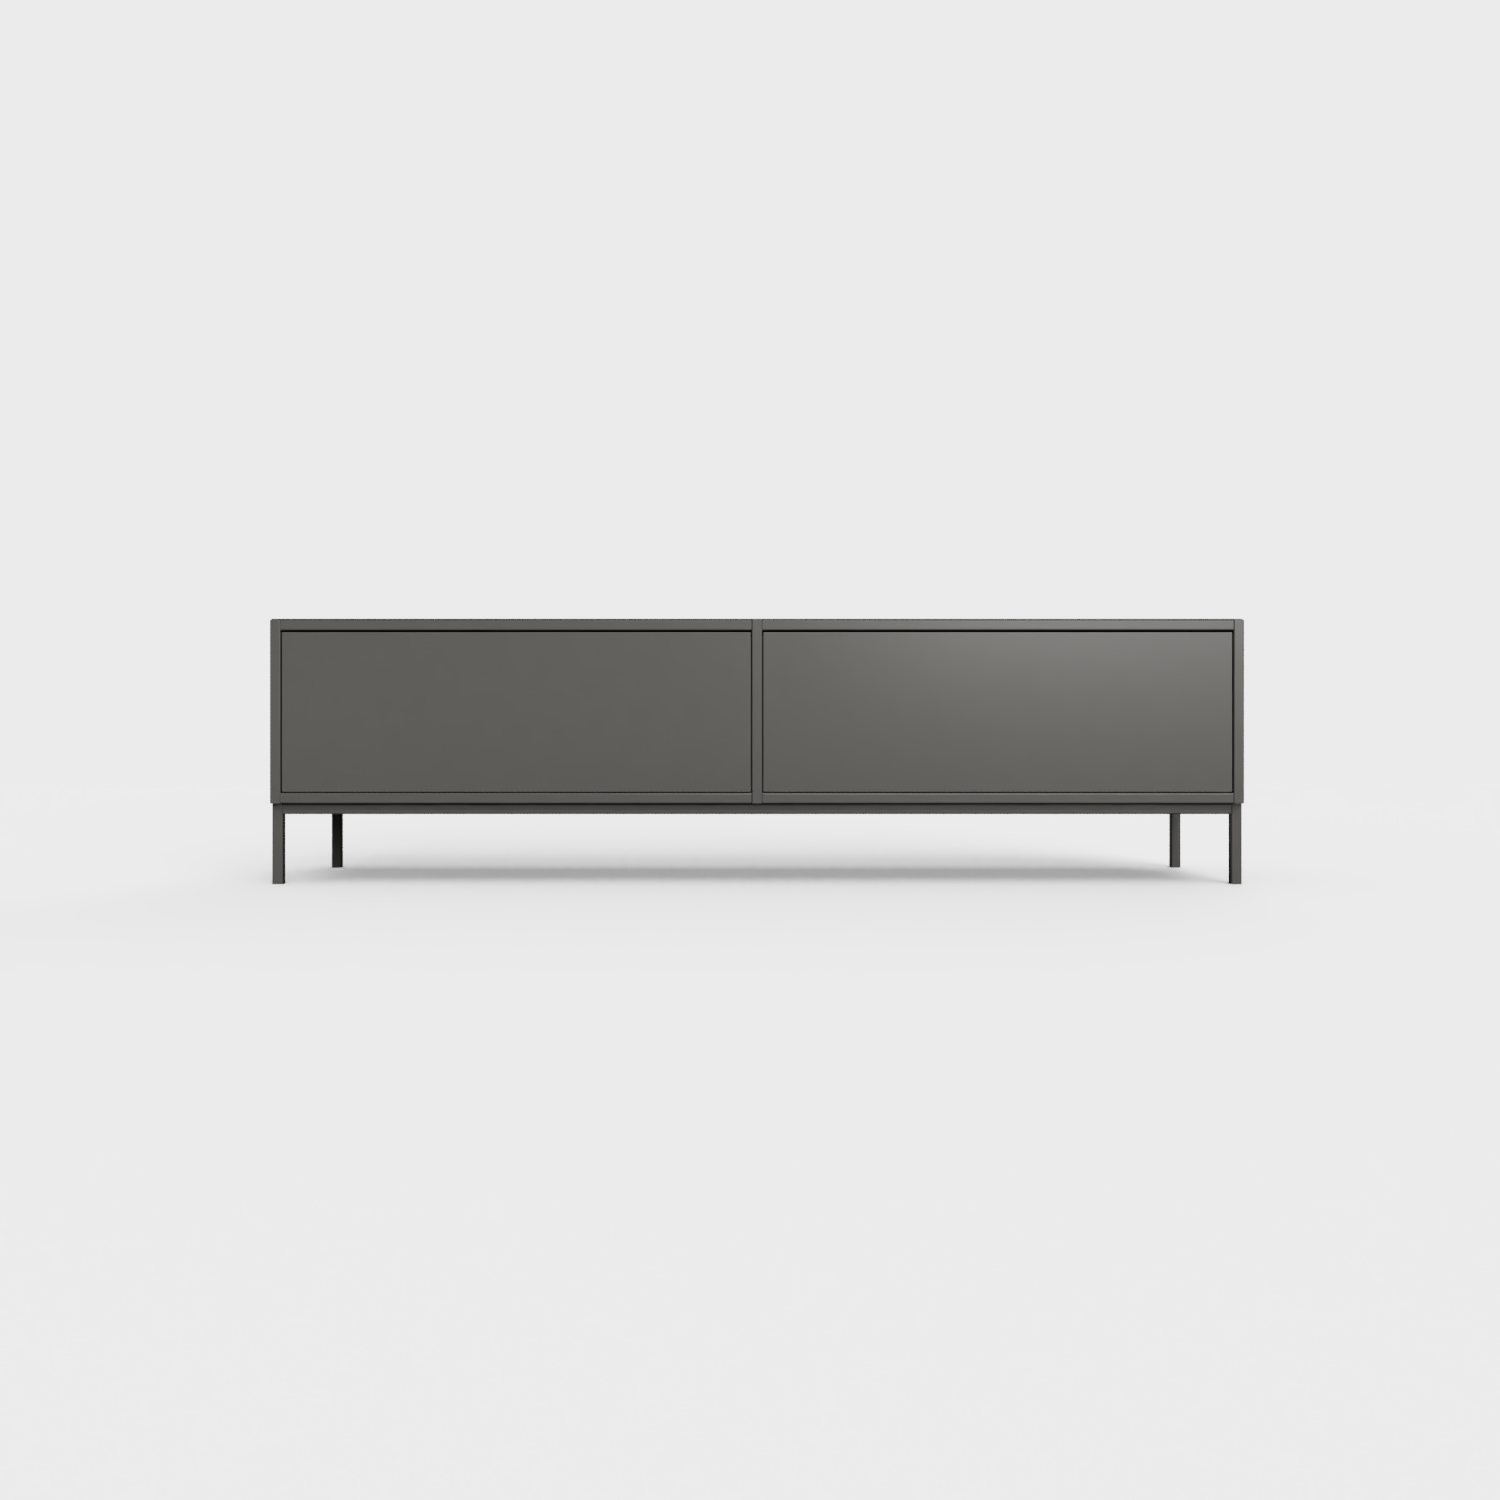 Prunus 01 Lowboard in Anthracite color, powder-coated steel, elegant and modern piece of furniture for your living room